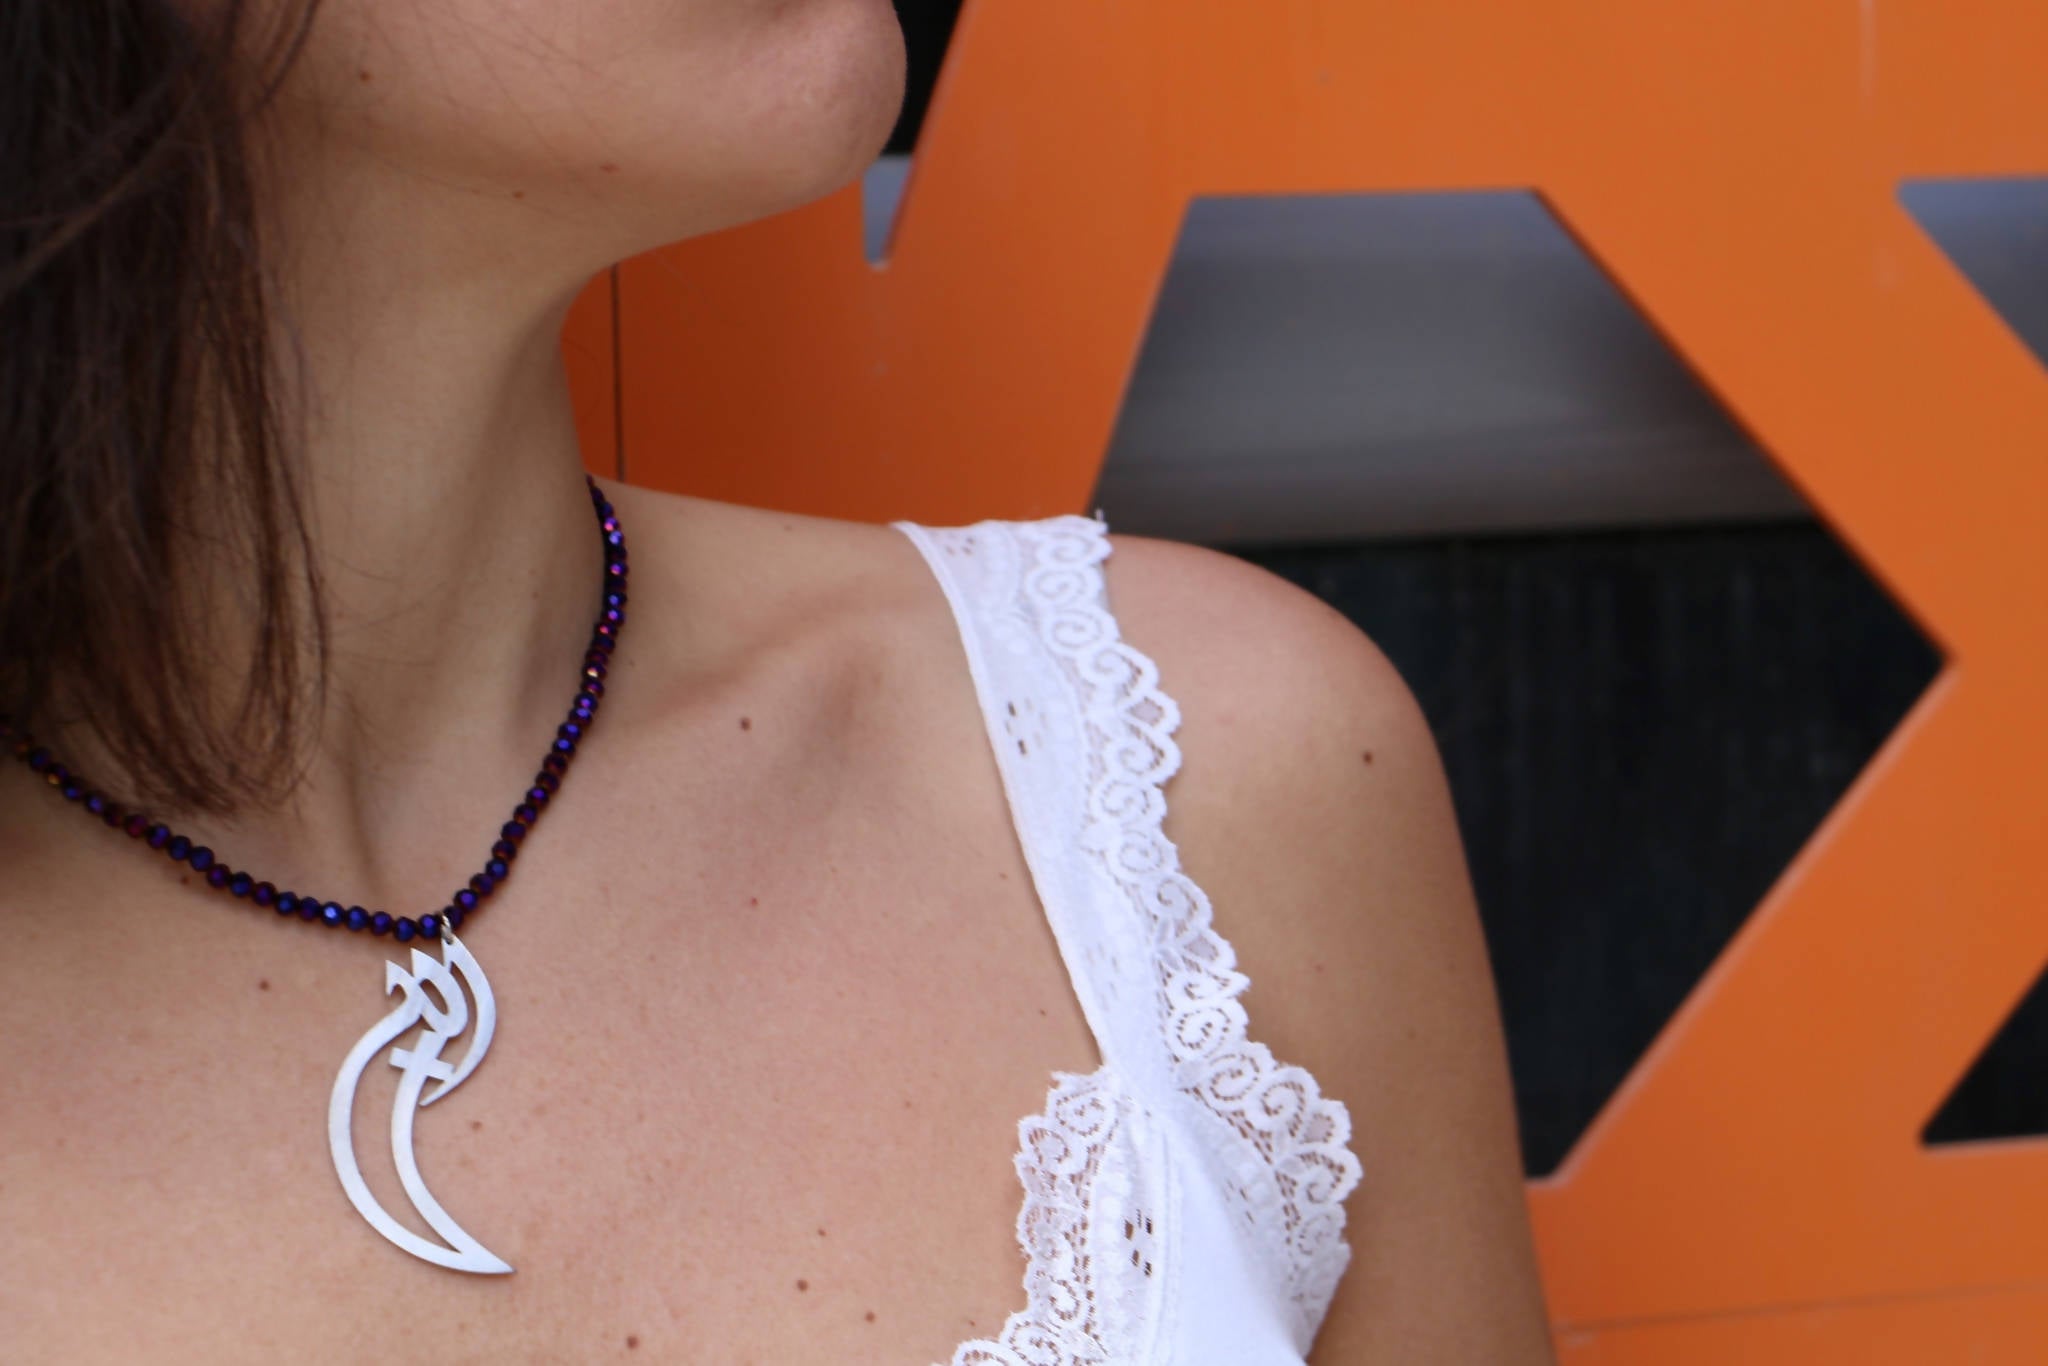 "The One" Necklace by Dina B.